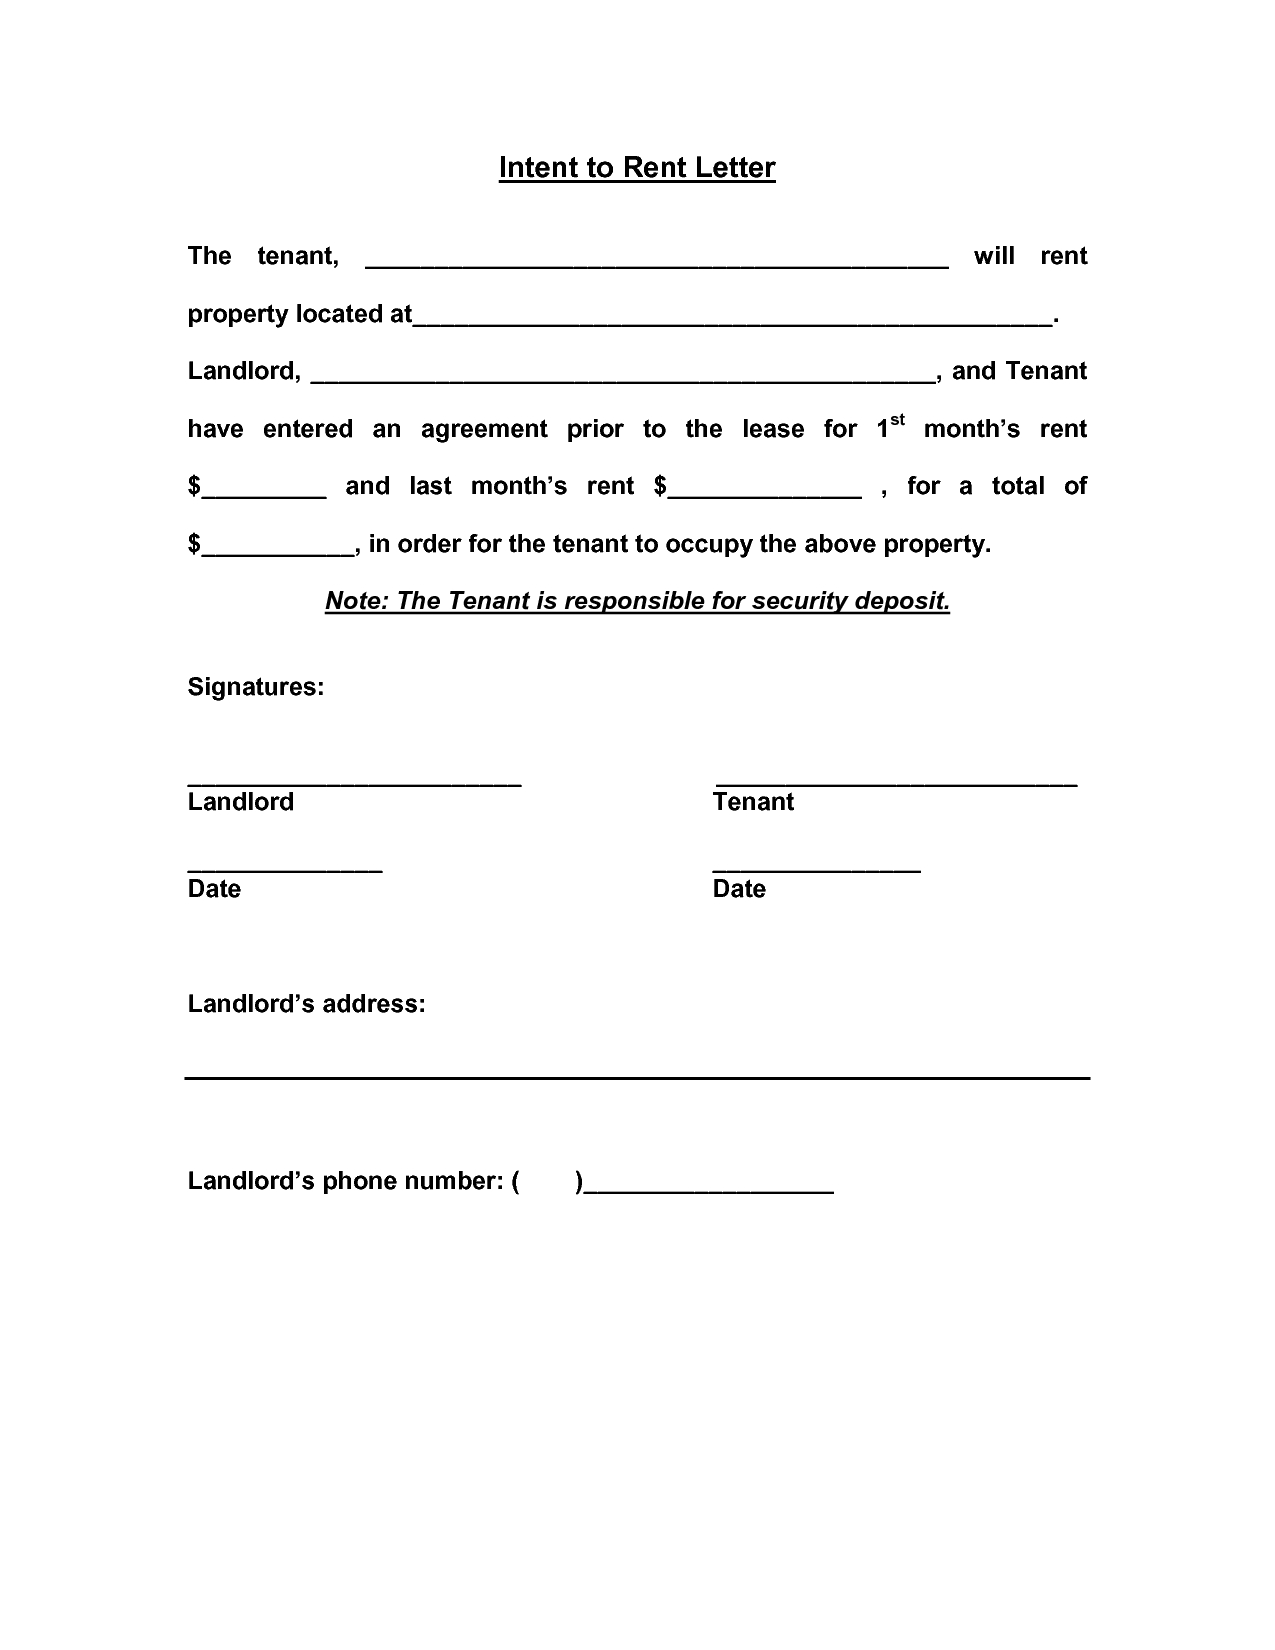 Breaking Lease Agreement Letter Template - Letter Intent to Lease Design Residential Sample Google